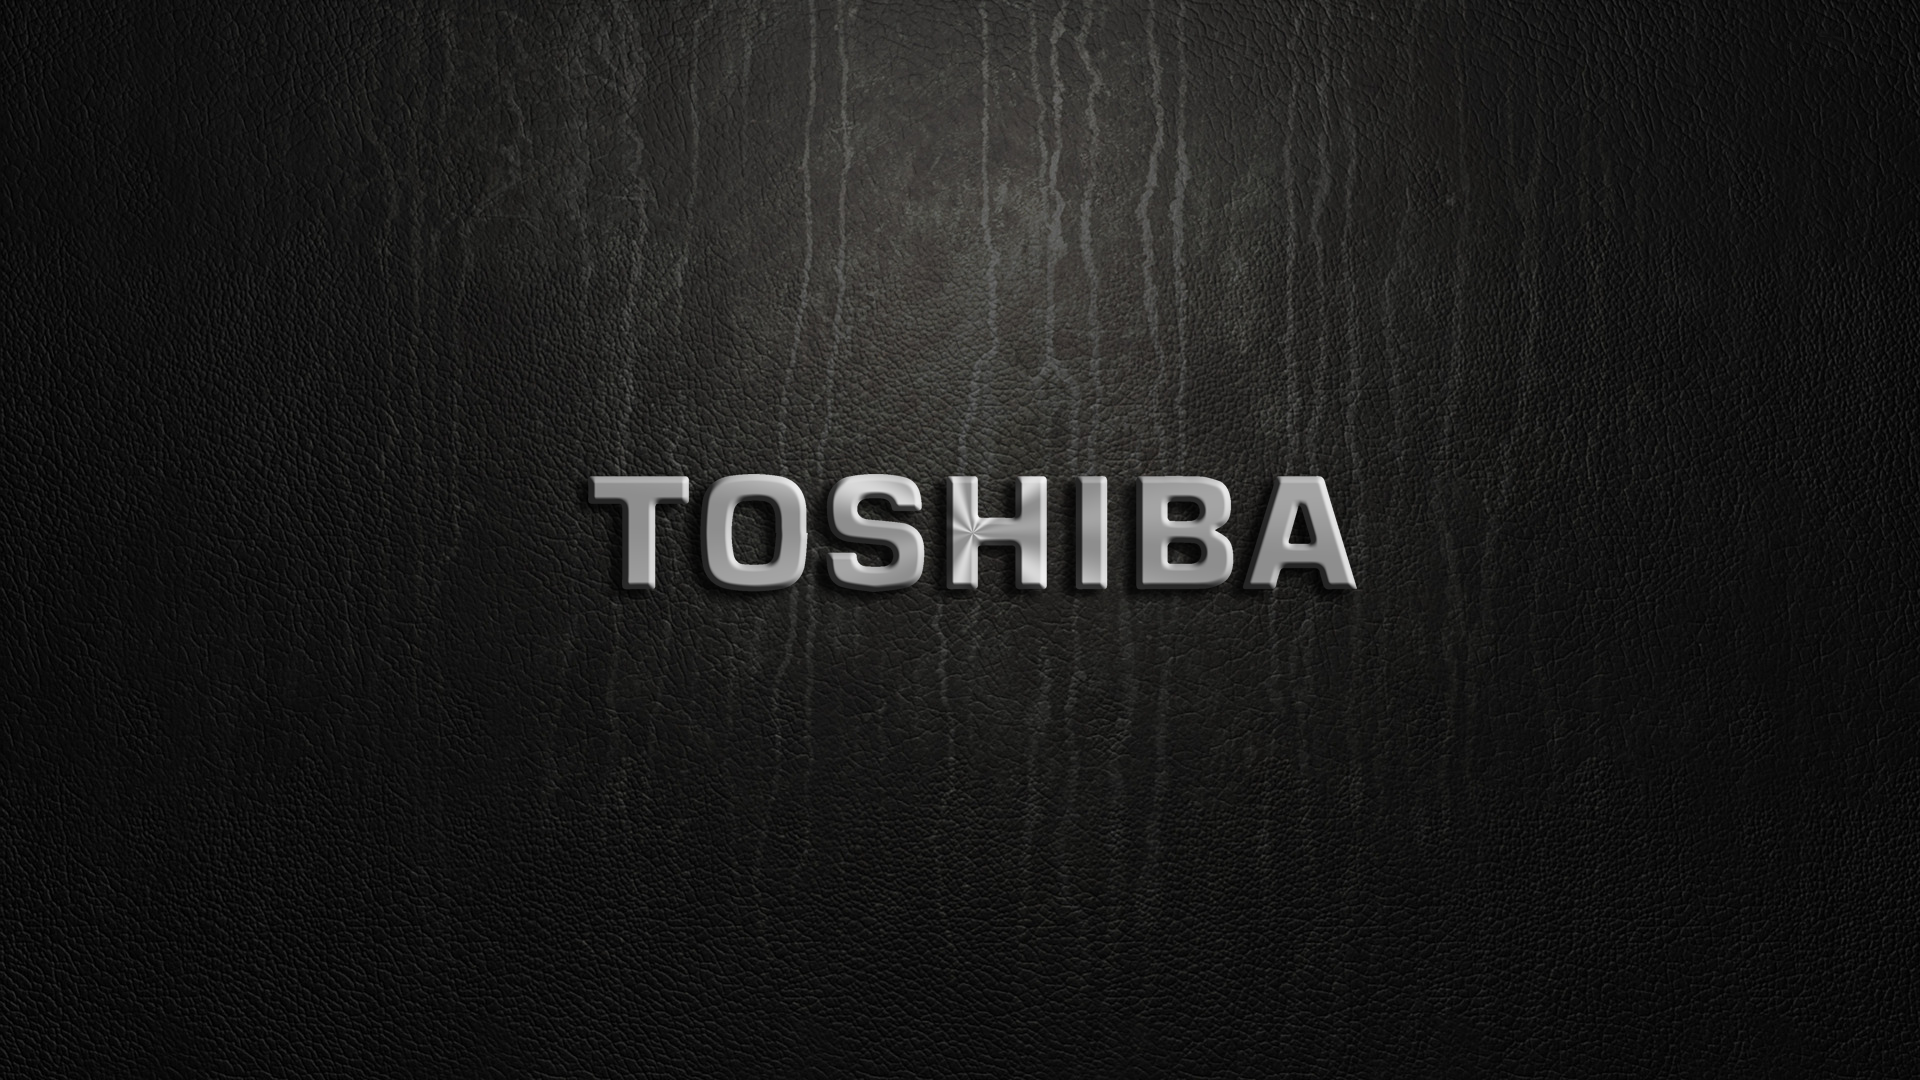 Toshiba hd papers and backgrounds